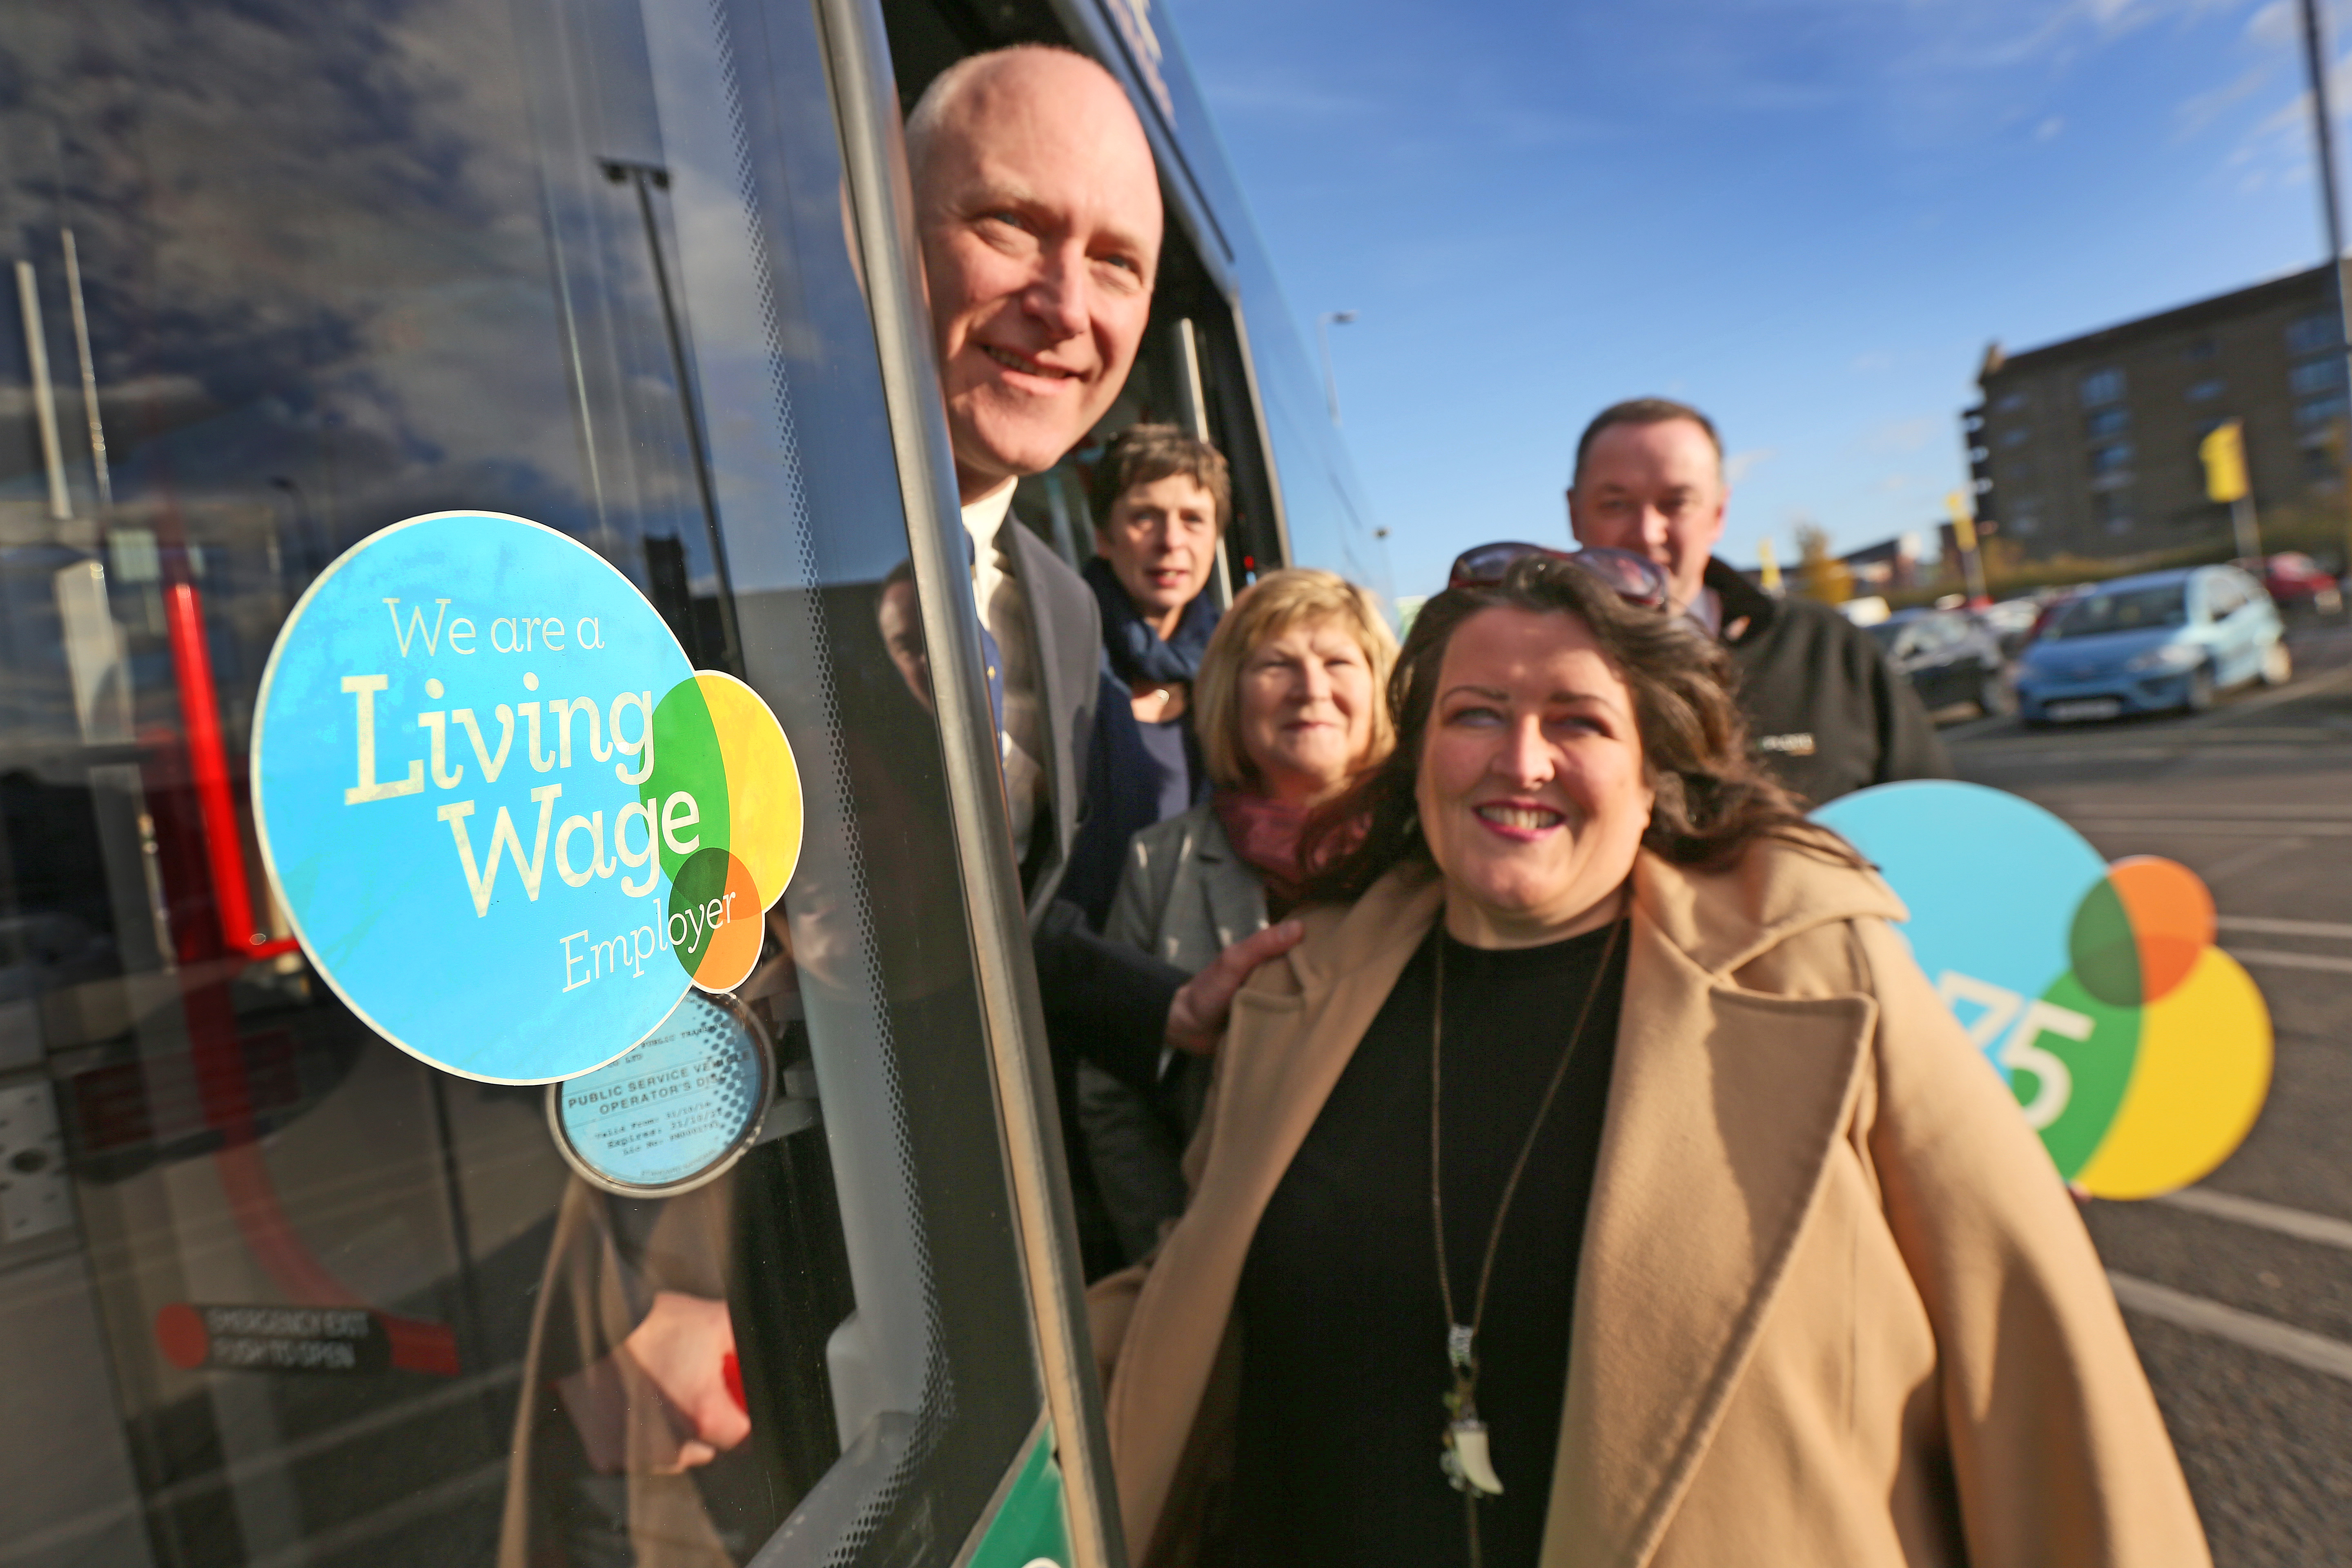 50 business in Dundee have so far signed up to the 'real Living Wage' of £9 per hour